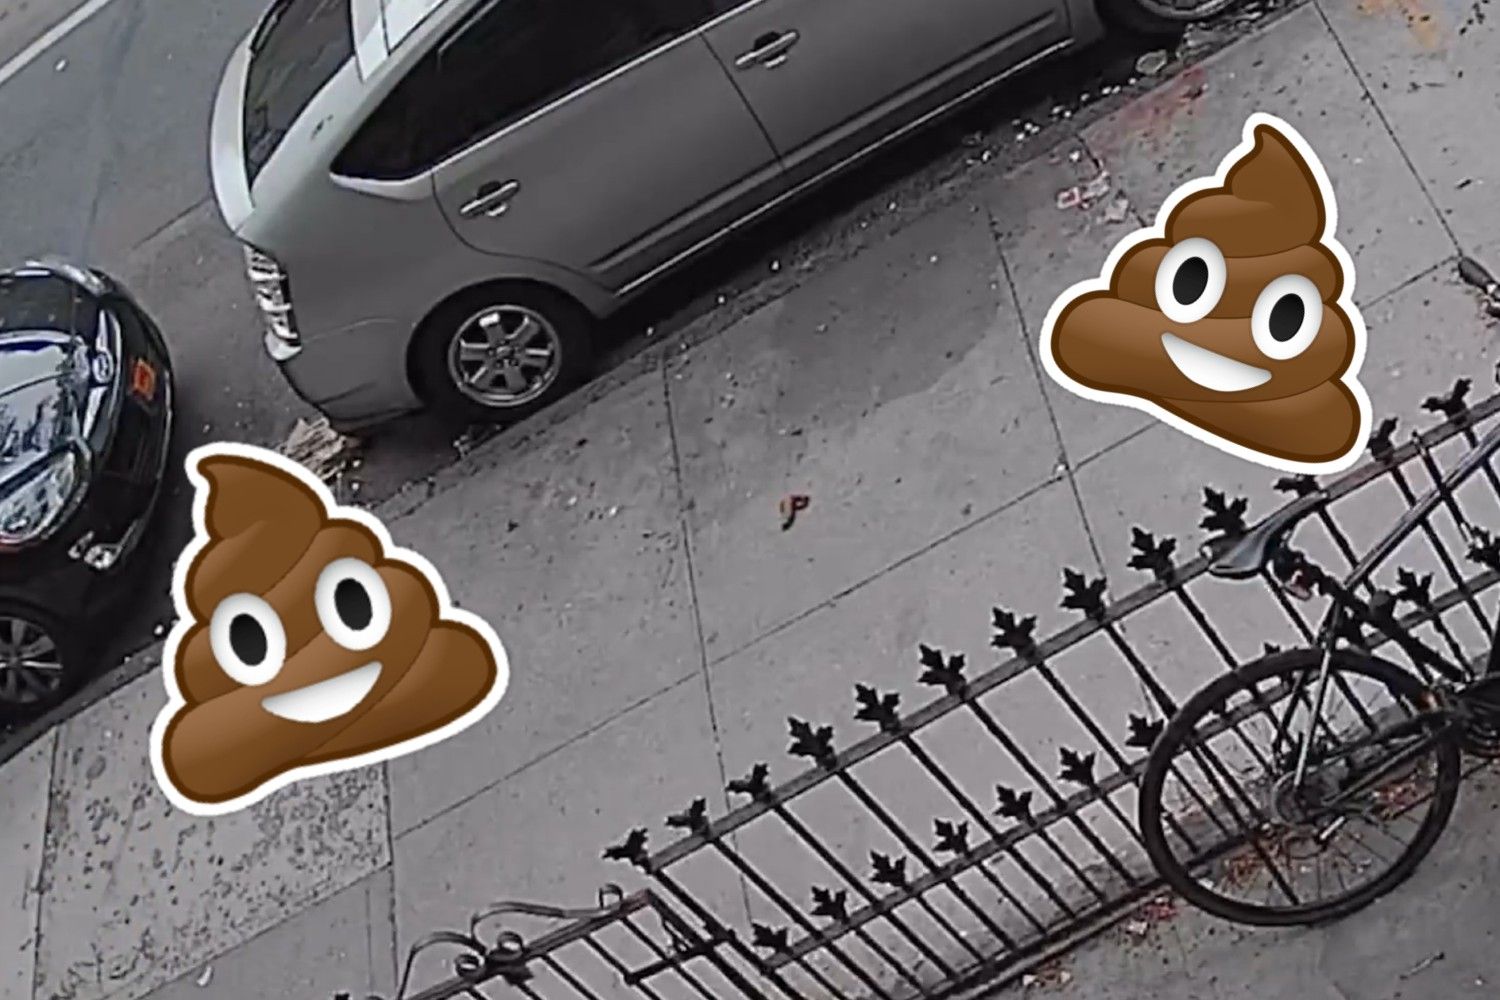 A surveillance still of dog poop with two large and happy poop emojis superimposed over it.